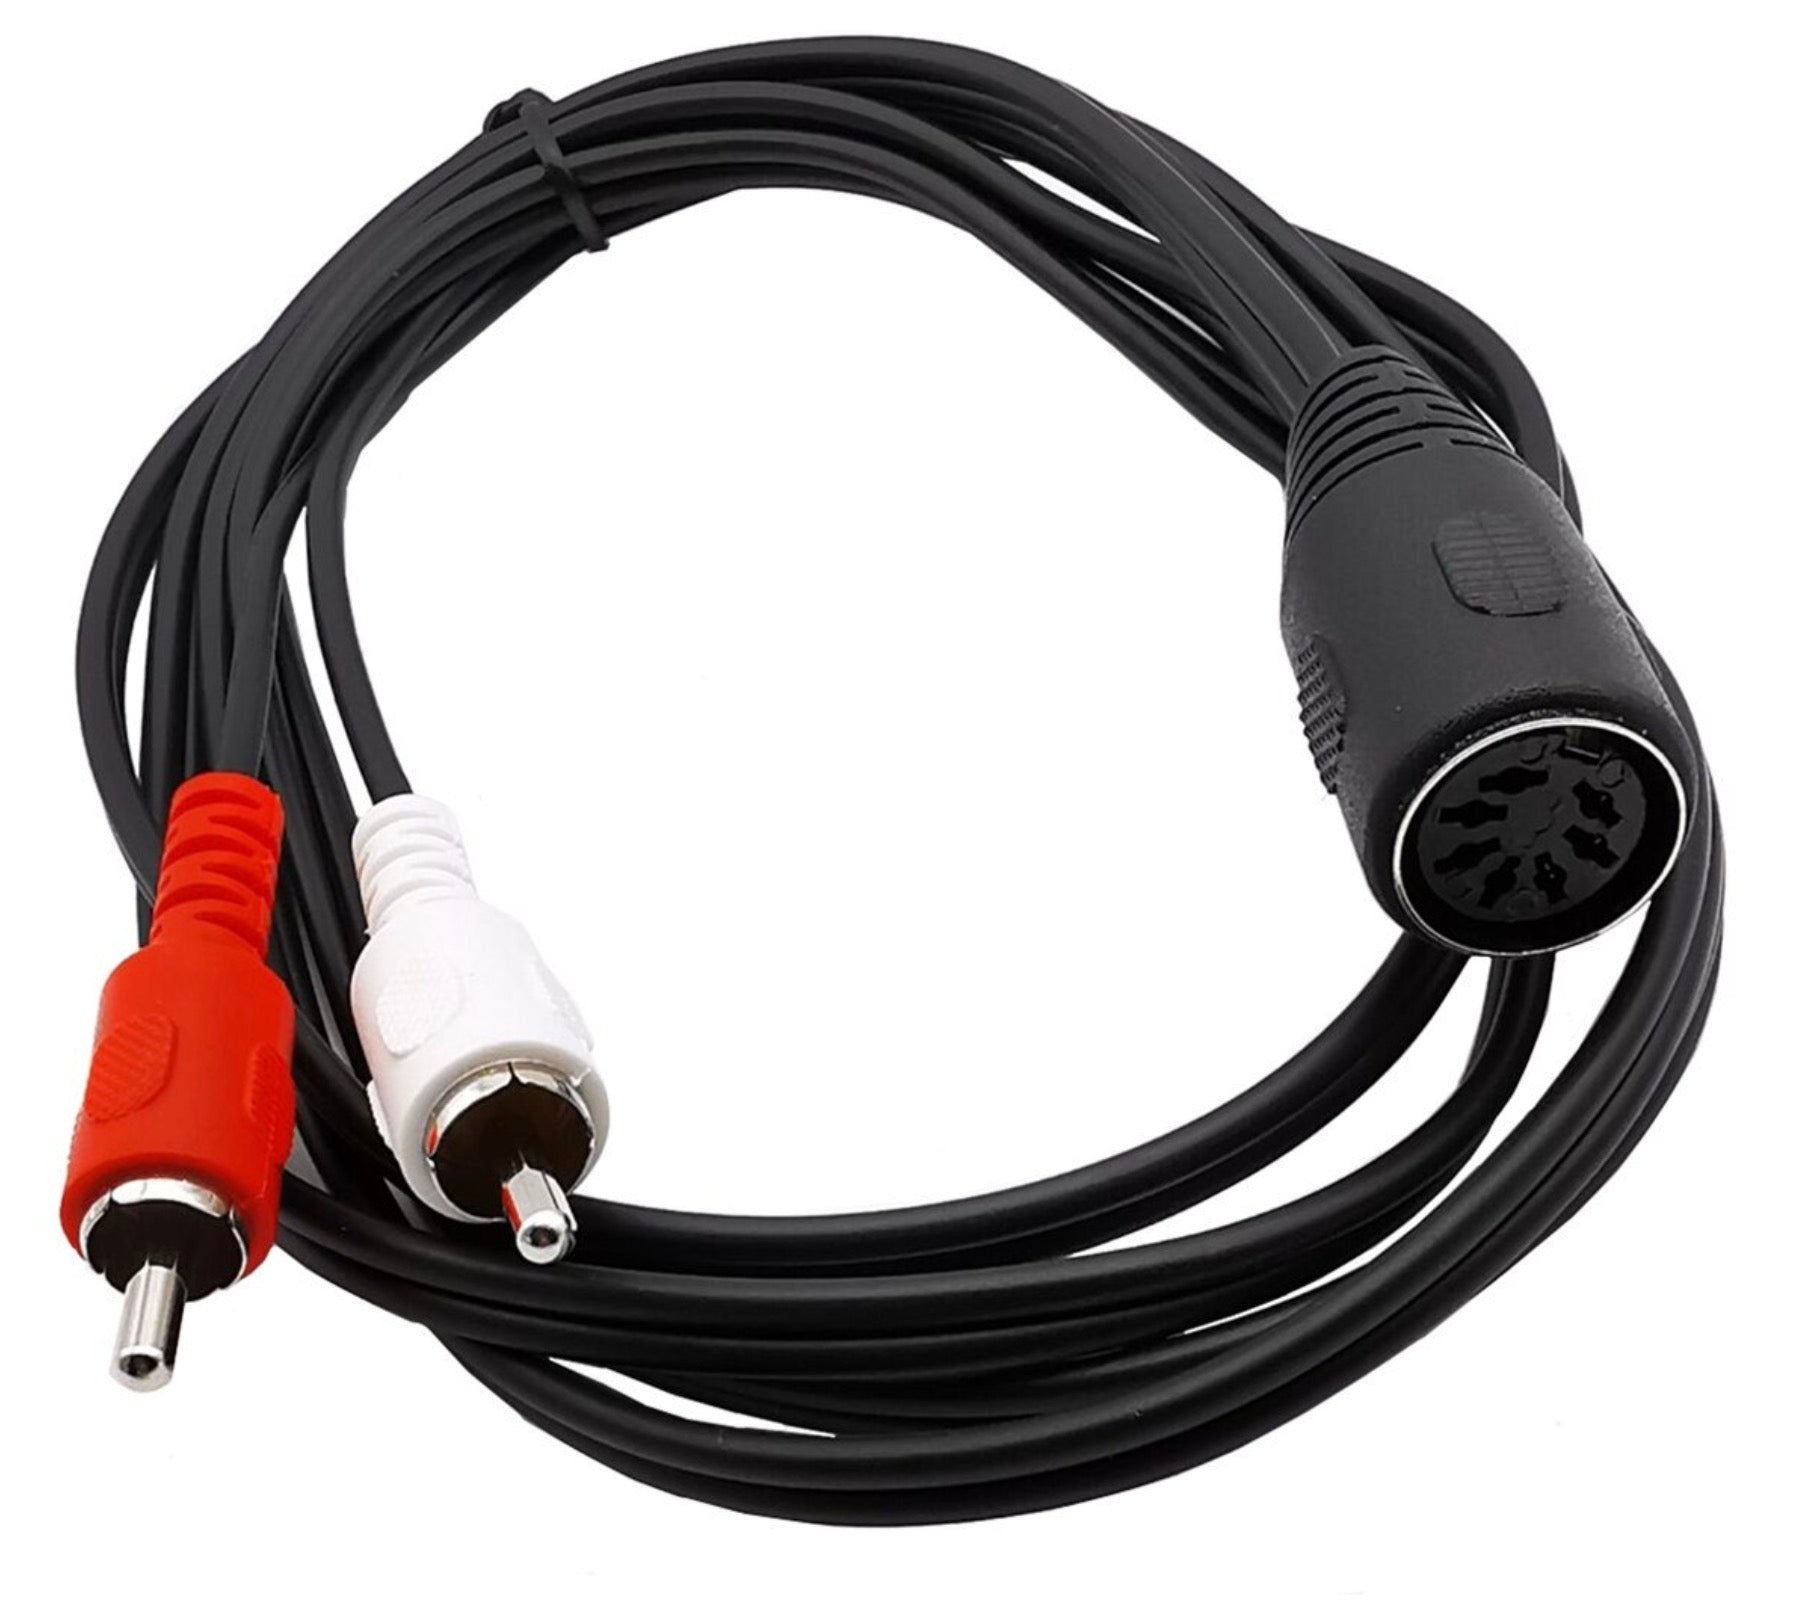 7-Pin Din Female to Dual RCA Male Audio Cable for Bang & Olufsen, Naim, Quad, Stereo Systems